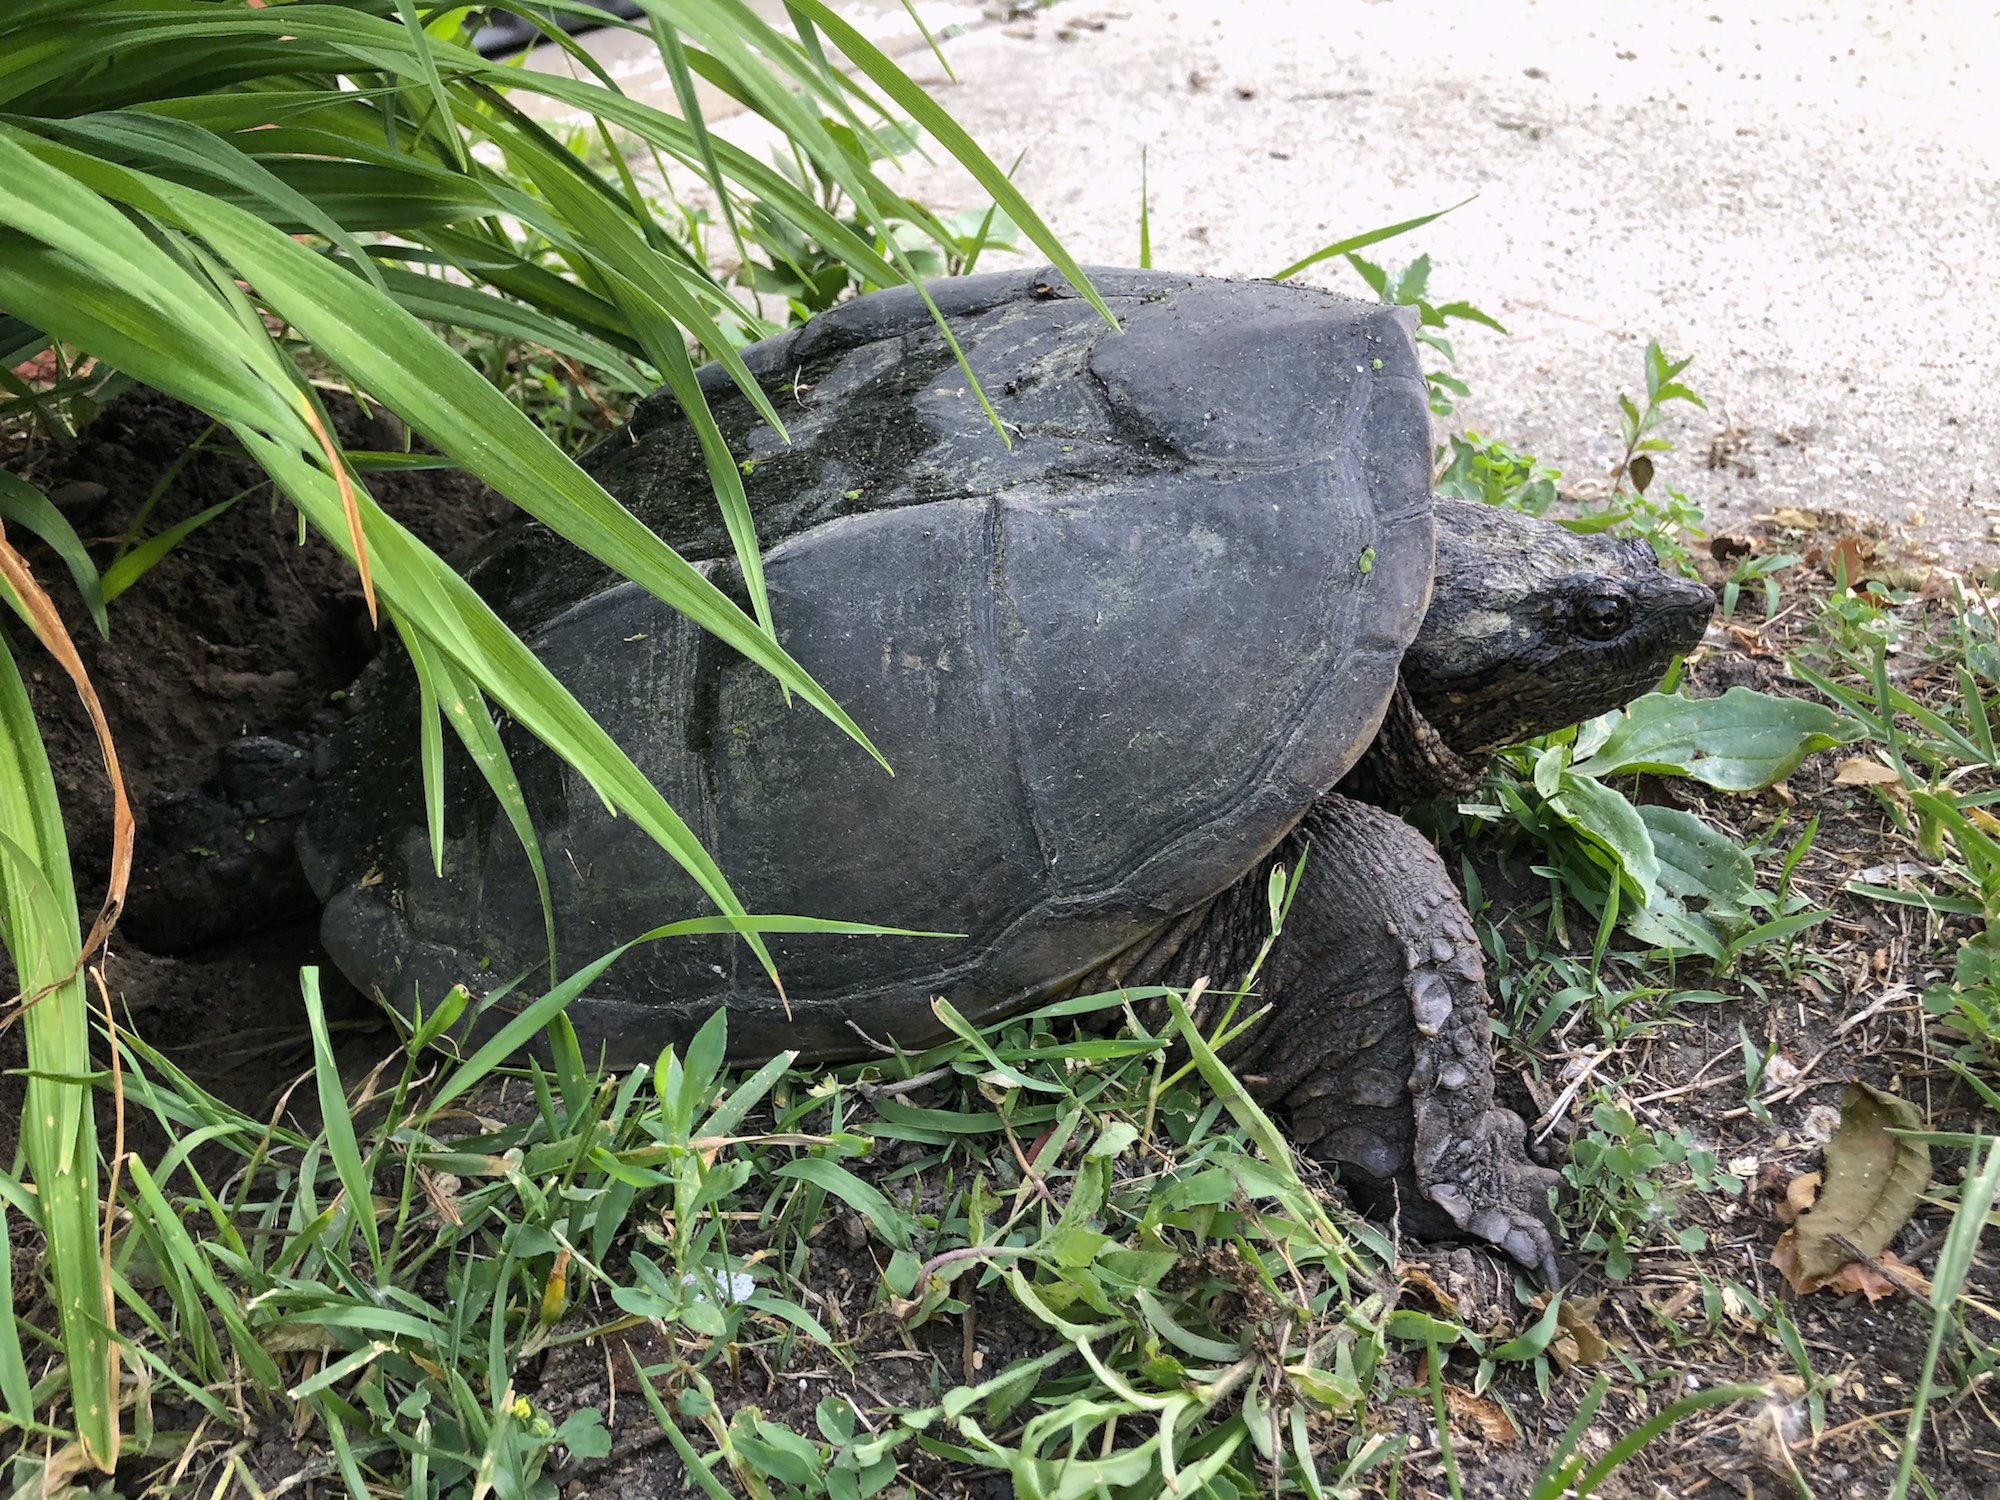 Snapping Turtle laying eggs in flower bed along Arbor Drive in Madison, Wisconsin on June 8, 2020.